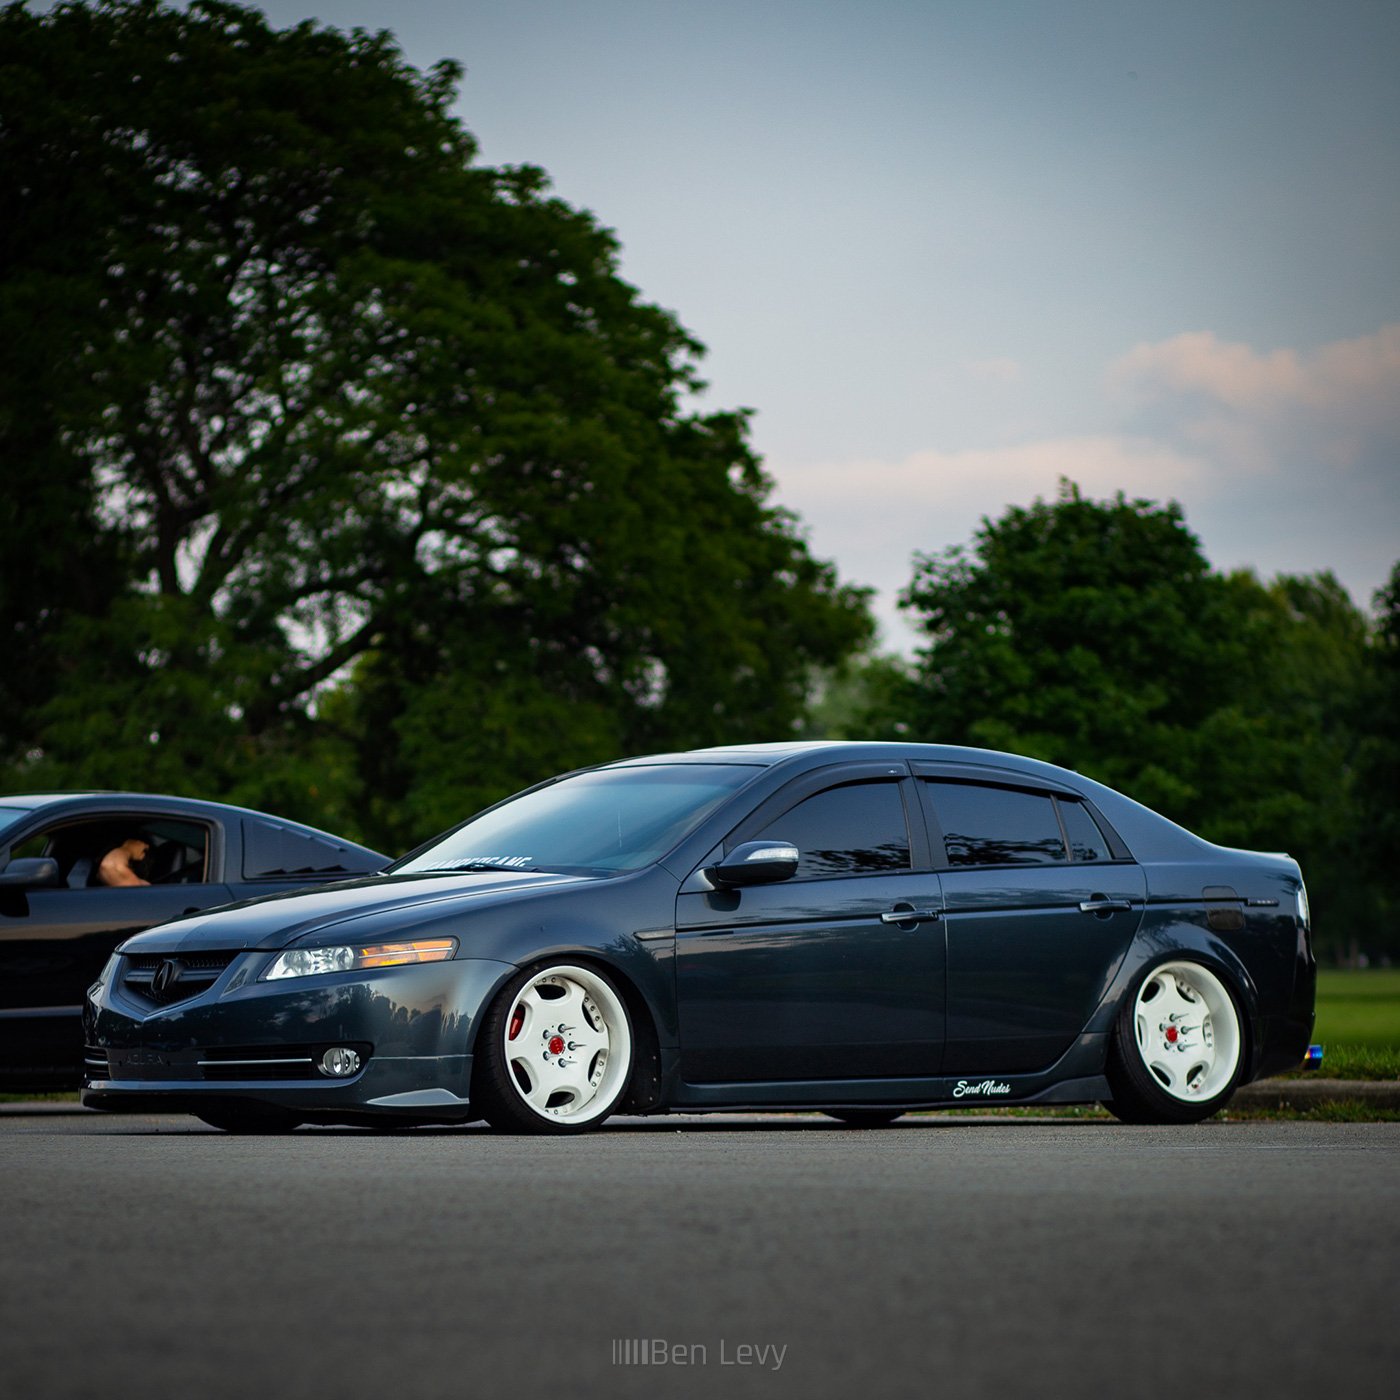 Bagged Acura TL at Schiller Woods in Chicago